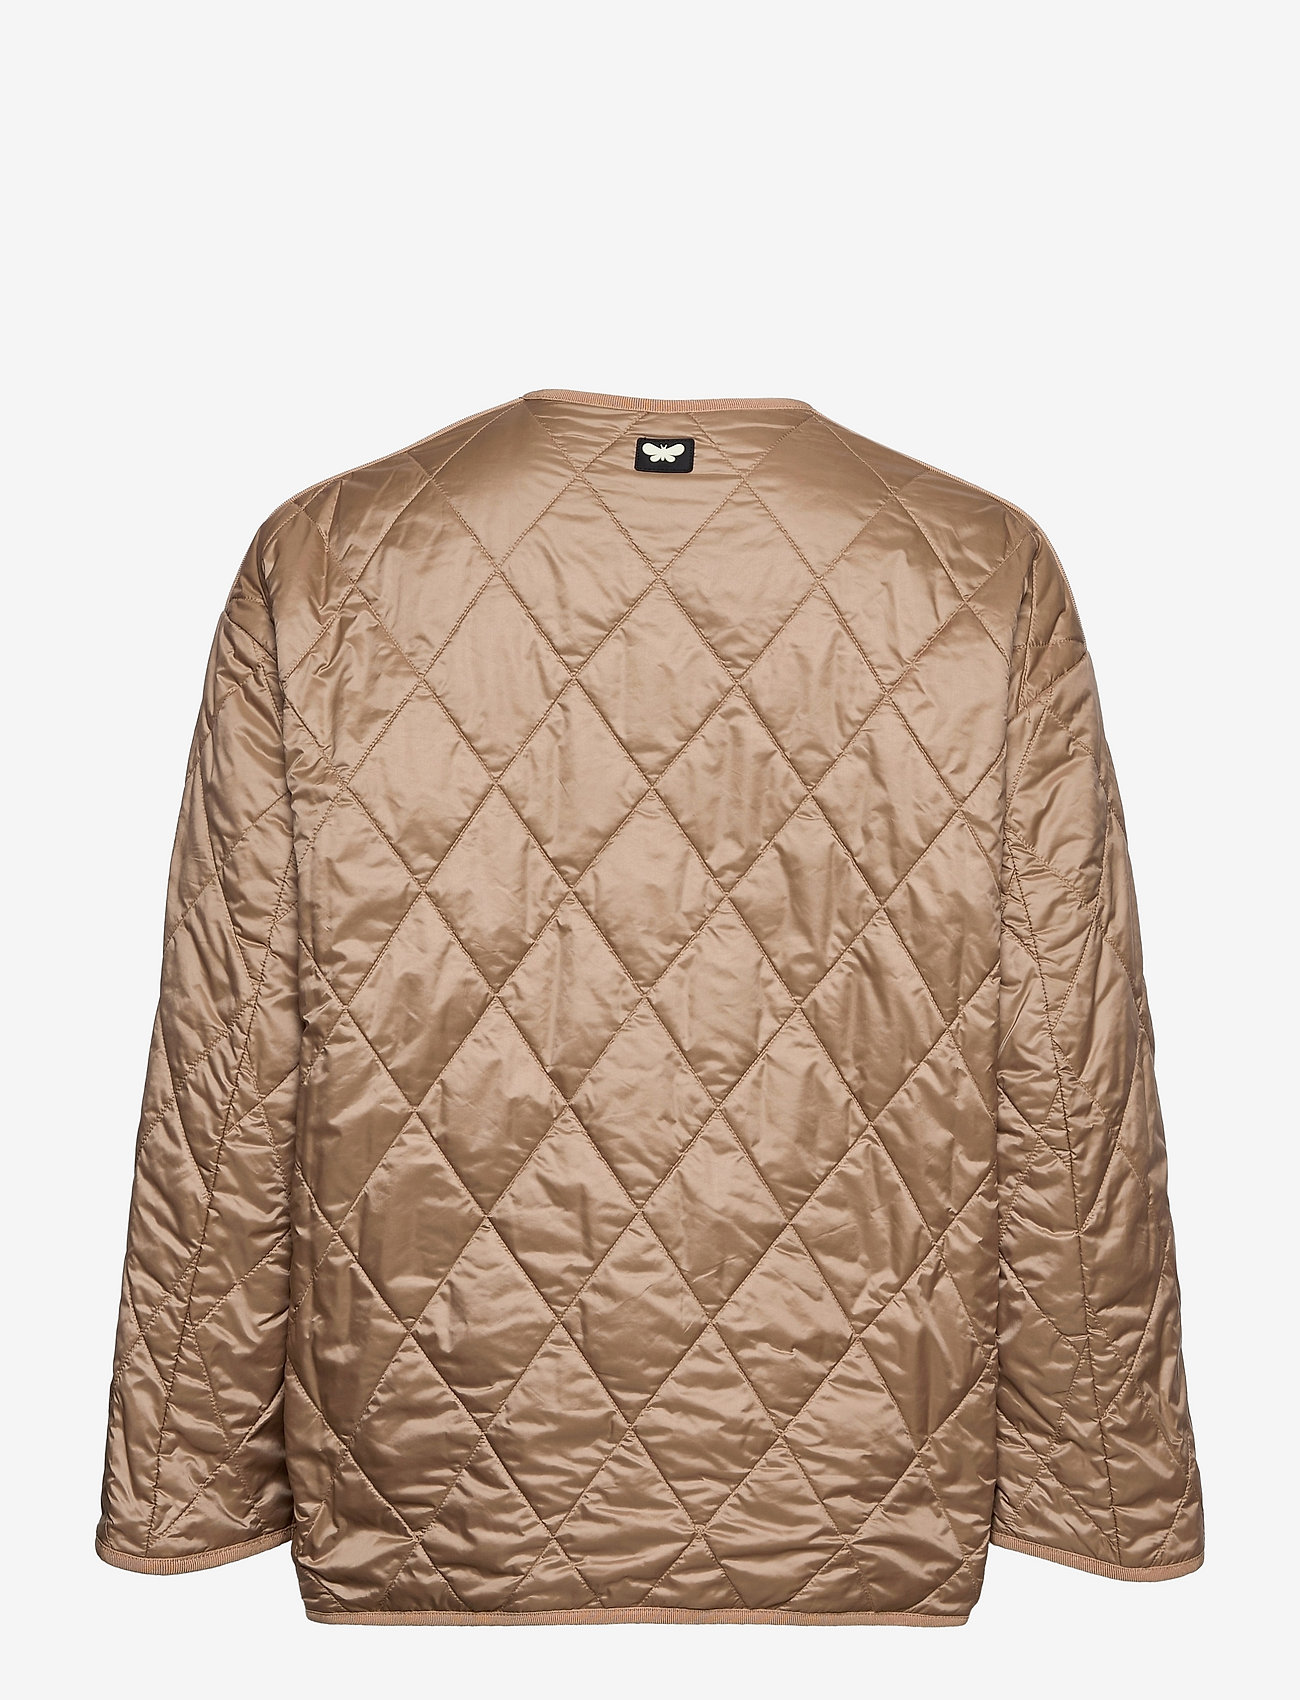 engagement eftertiden Uplifted Weekend Max Mara Aquila - Quilted jackets | Boozt.com